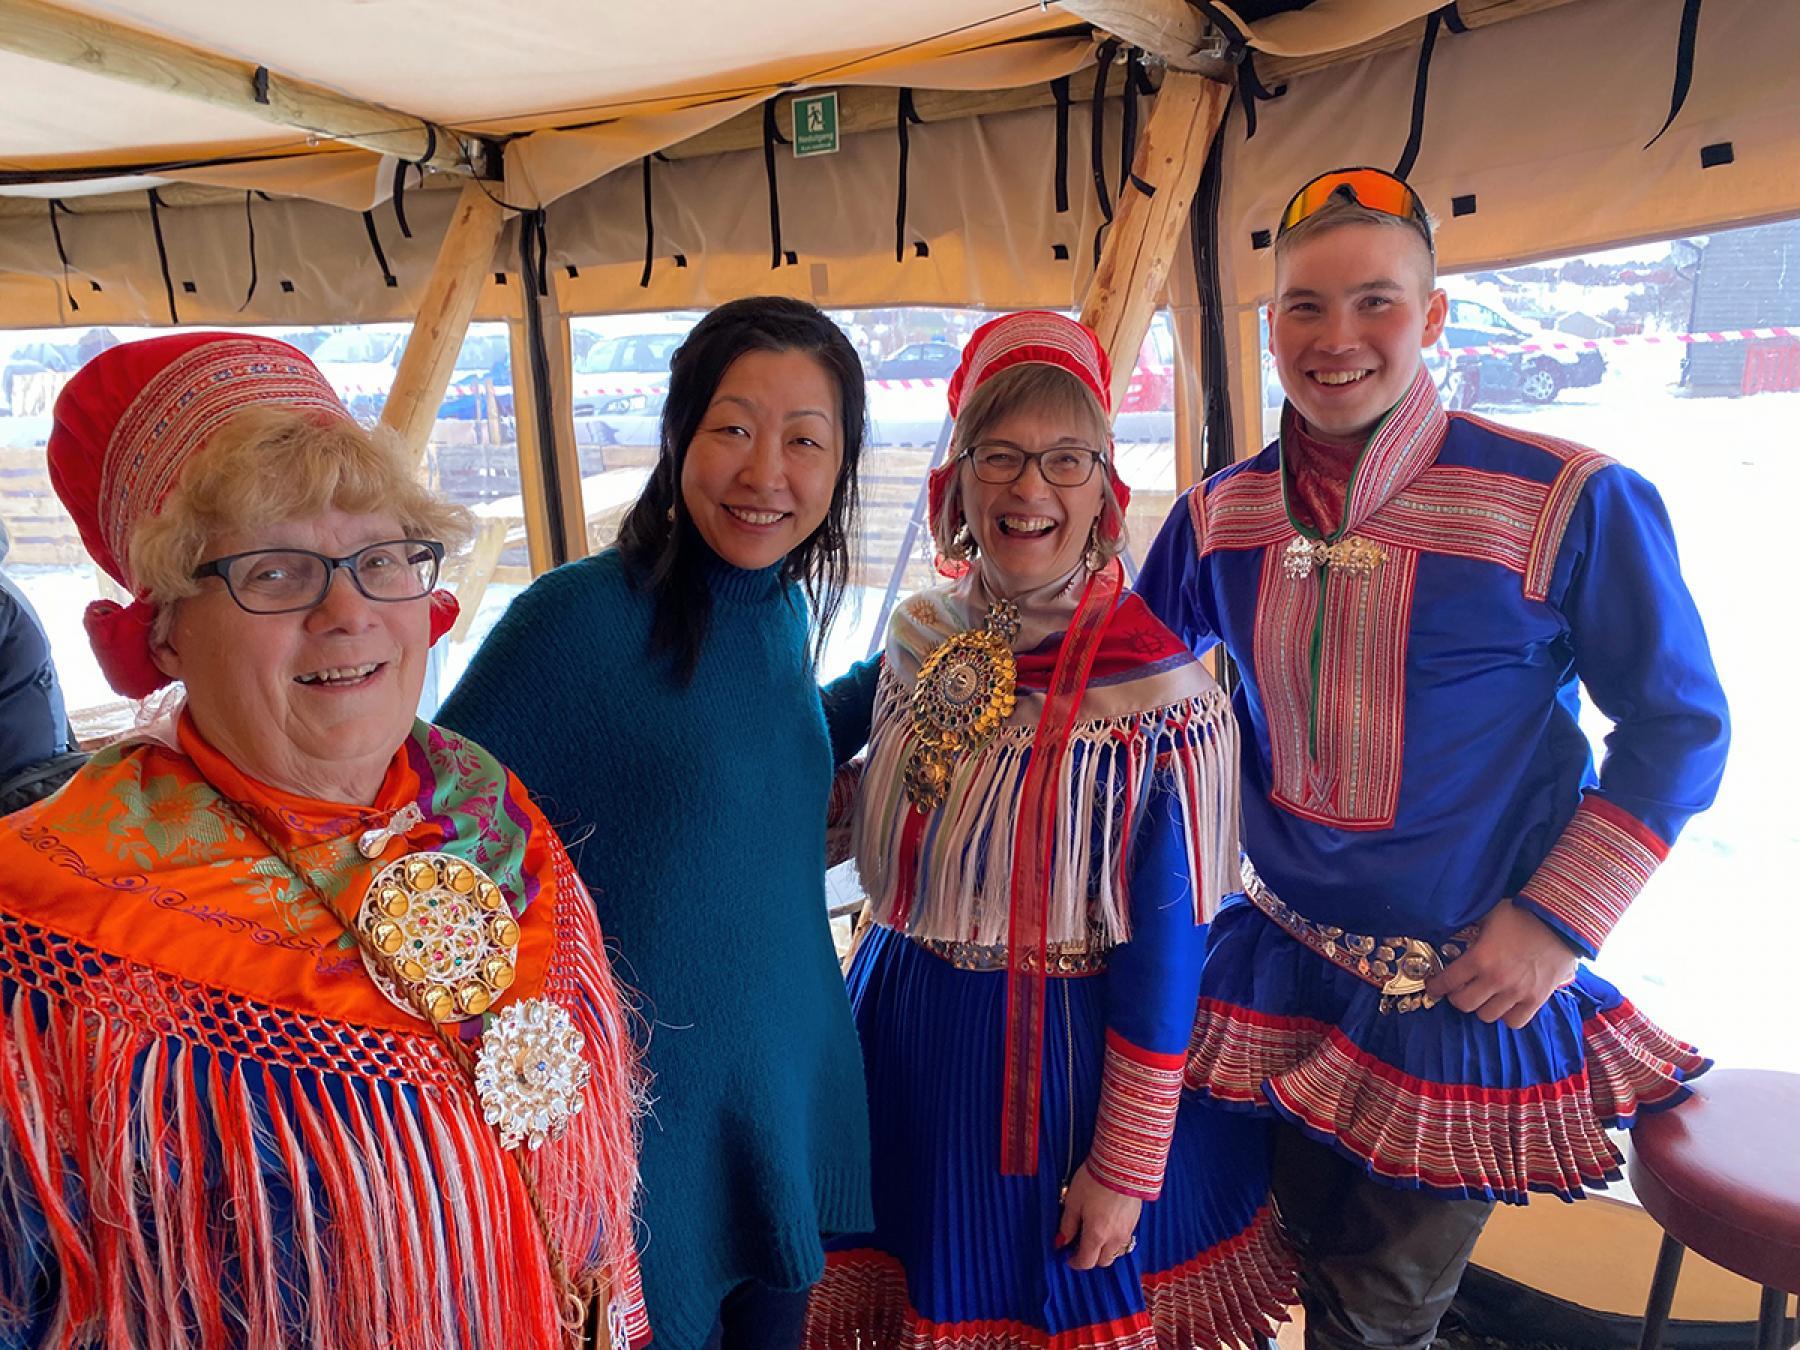 Liu with Sámi community during the Sámi Easter Festival in Kautokeino, Norway